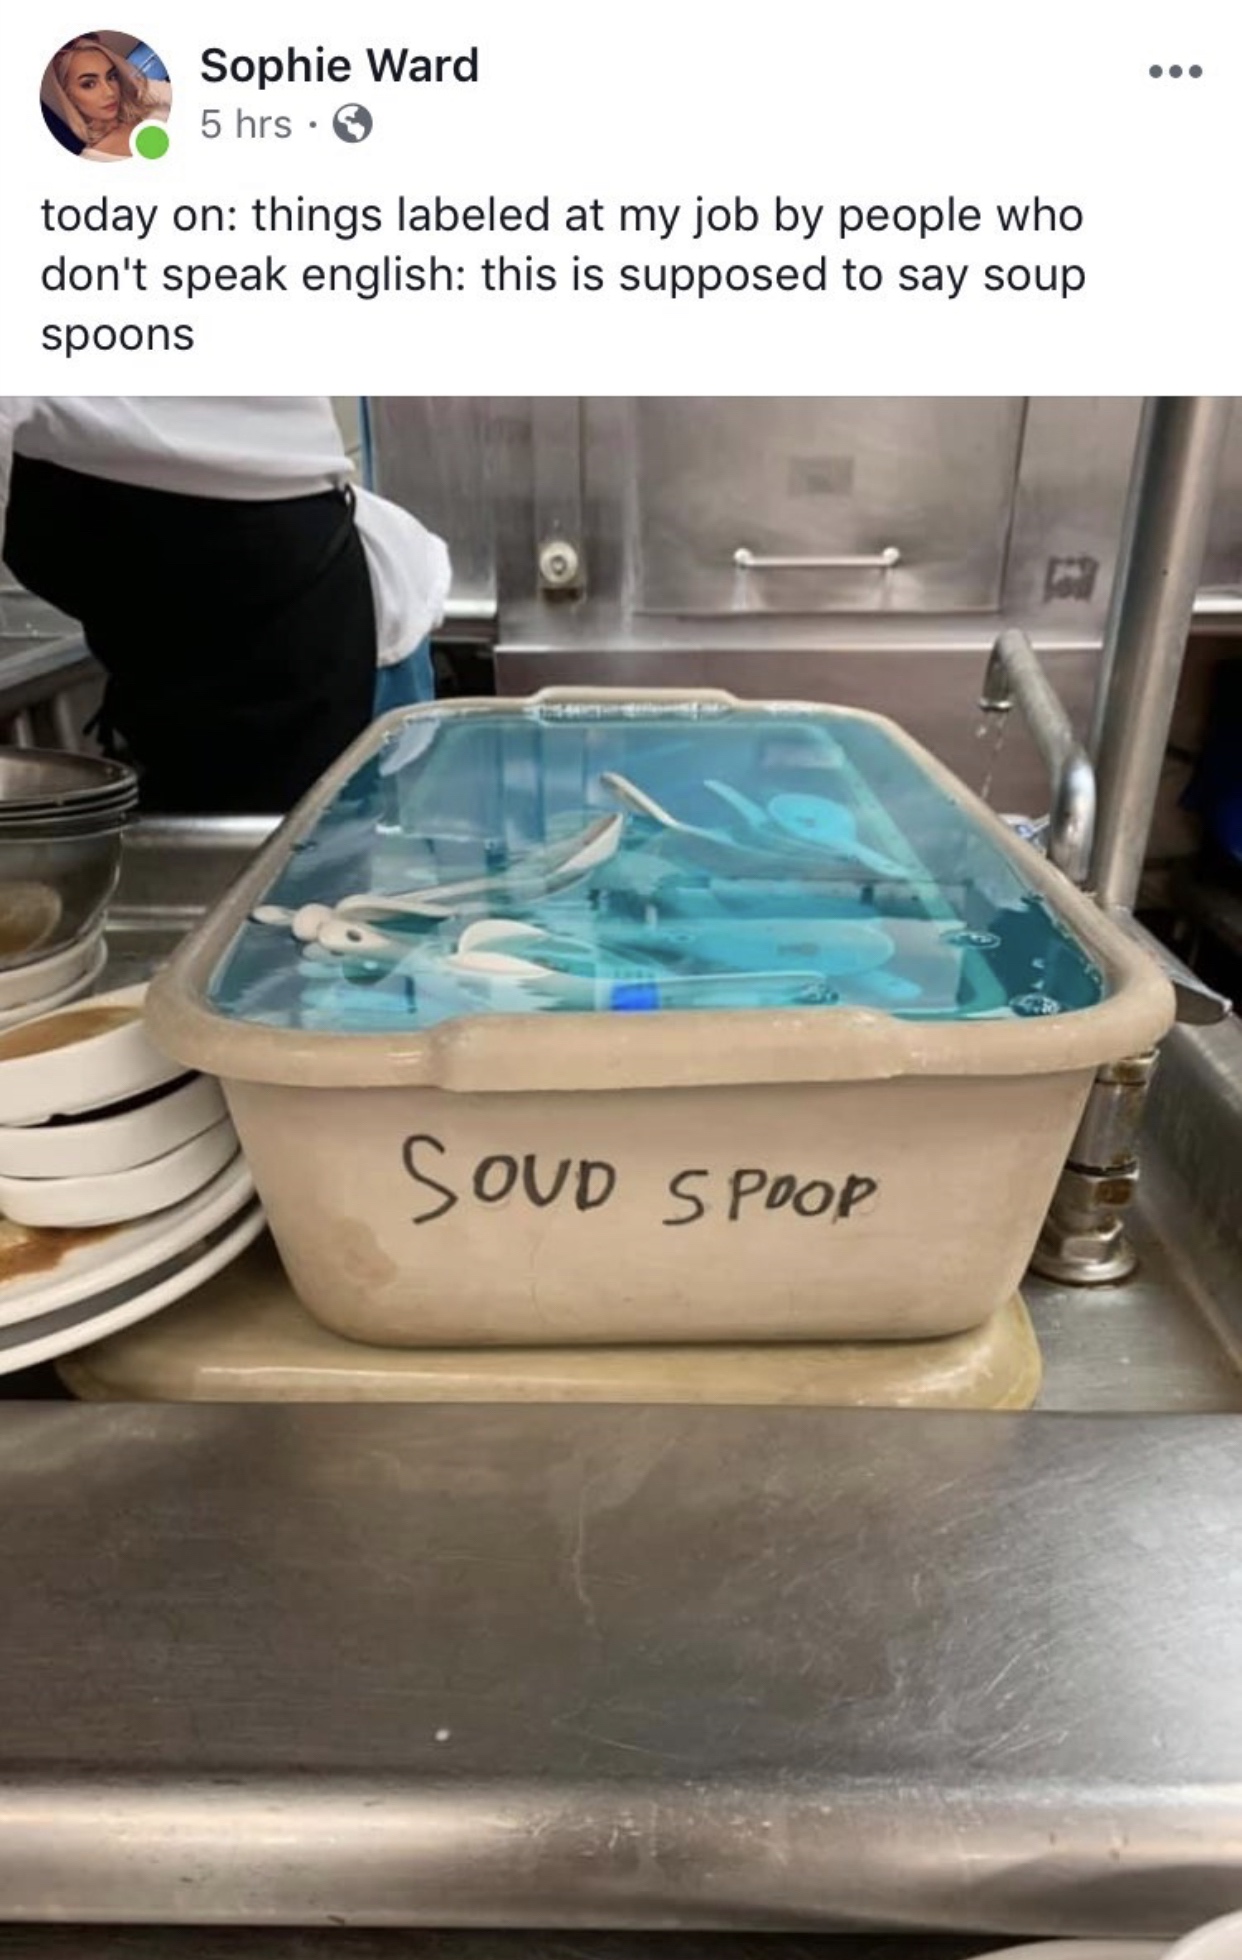 water - Sophie Ward 5 hrs. today on things labeled at my job by people who don't speak english this is supposed to say soup spoons Soud Spoor